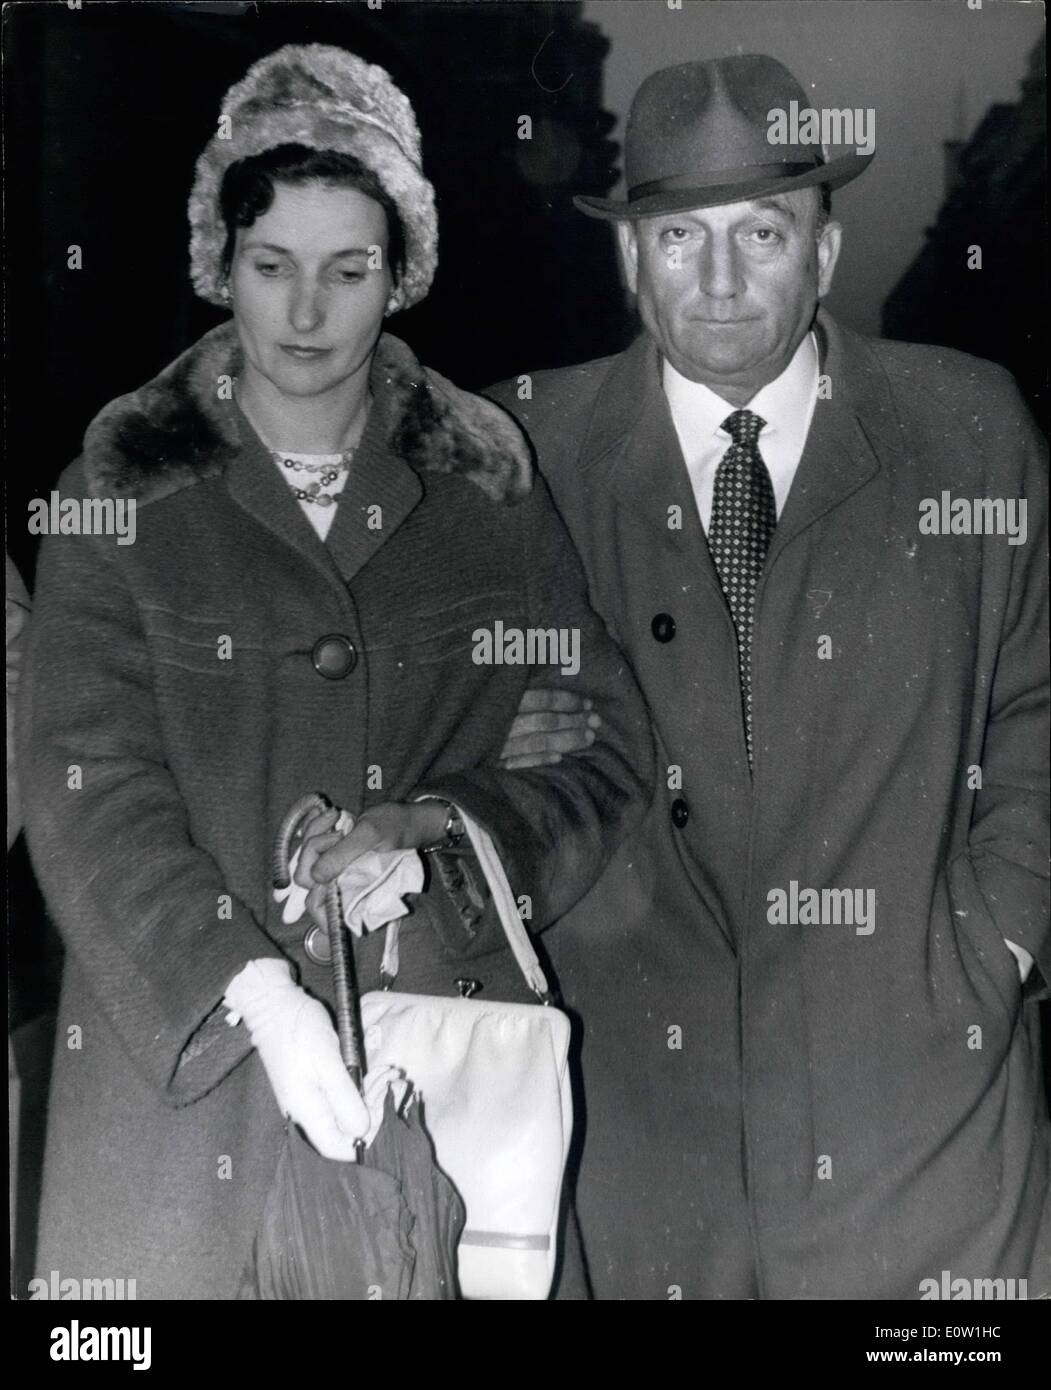 Nov. 11, 1960 - Doctor Struck off register; The name of Dr. James Albert De Gregory was yesterday ordered by the Disciplinary Committee of the General Medical Council to be struck off the register after being found guilty of ''infamous conduct in a a professional respect''. The infamous conduct, the committee decided, was in Dr. De Gregory's improper association with his wife when she was married to another man and while he was her family doctor. At yesterday's hearing in London, 31 year old Mrs. Sheila De Gregroy, the doctors wife, admitted that when she was married to her first husband - Mr Stock Photo